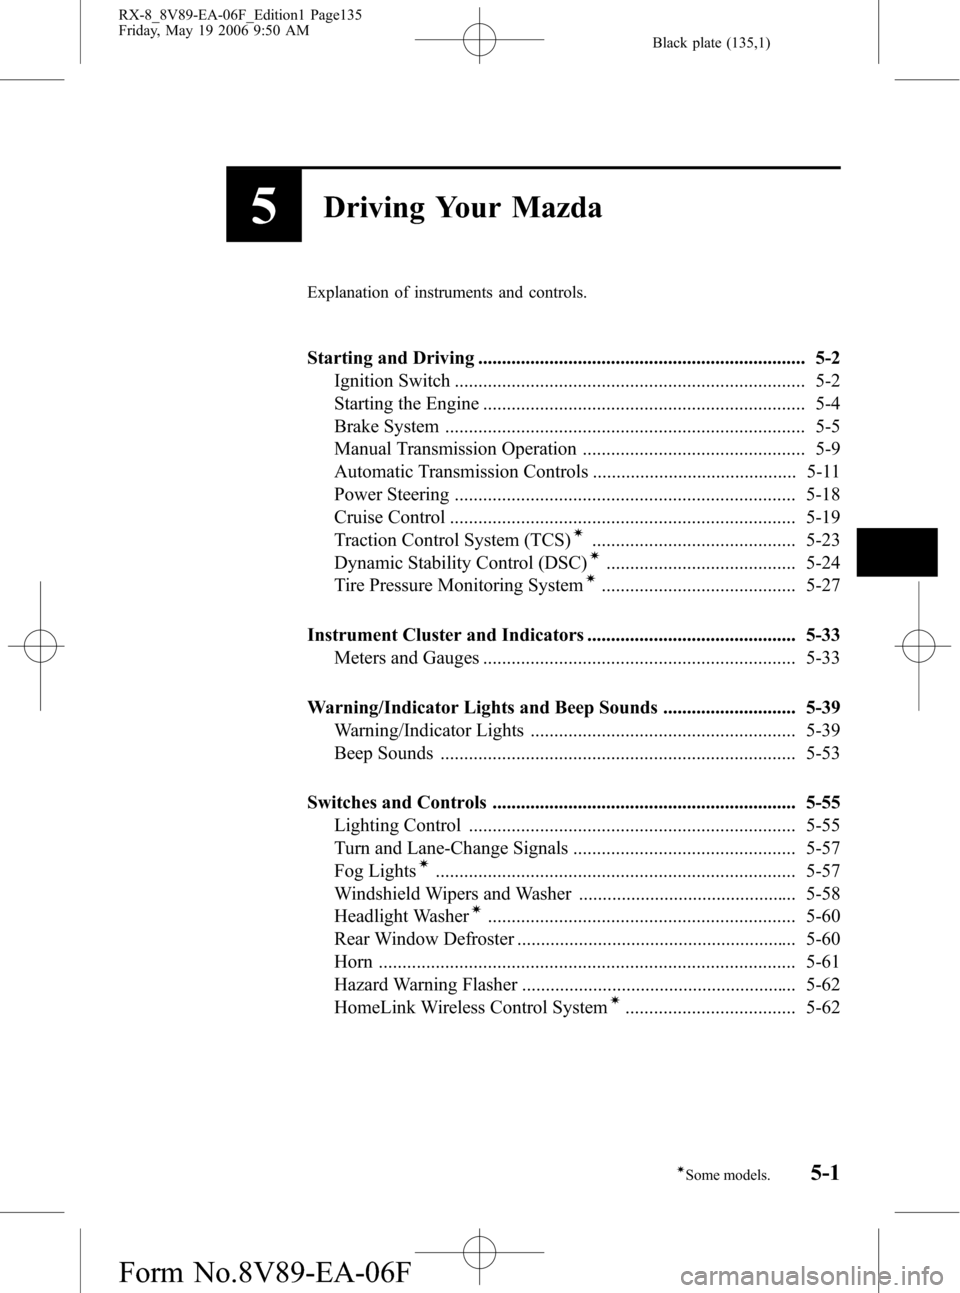 MAZDA MODEL RX 8 2007  Owners Manual (in English) Black plate (135,1)
5Driving Your Mazda
Explanation of instruments and controls.
Starting and Driving ..................................................................... 5-2
Ignition Switch ........